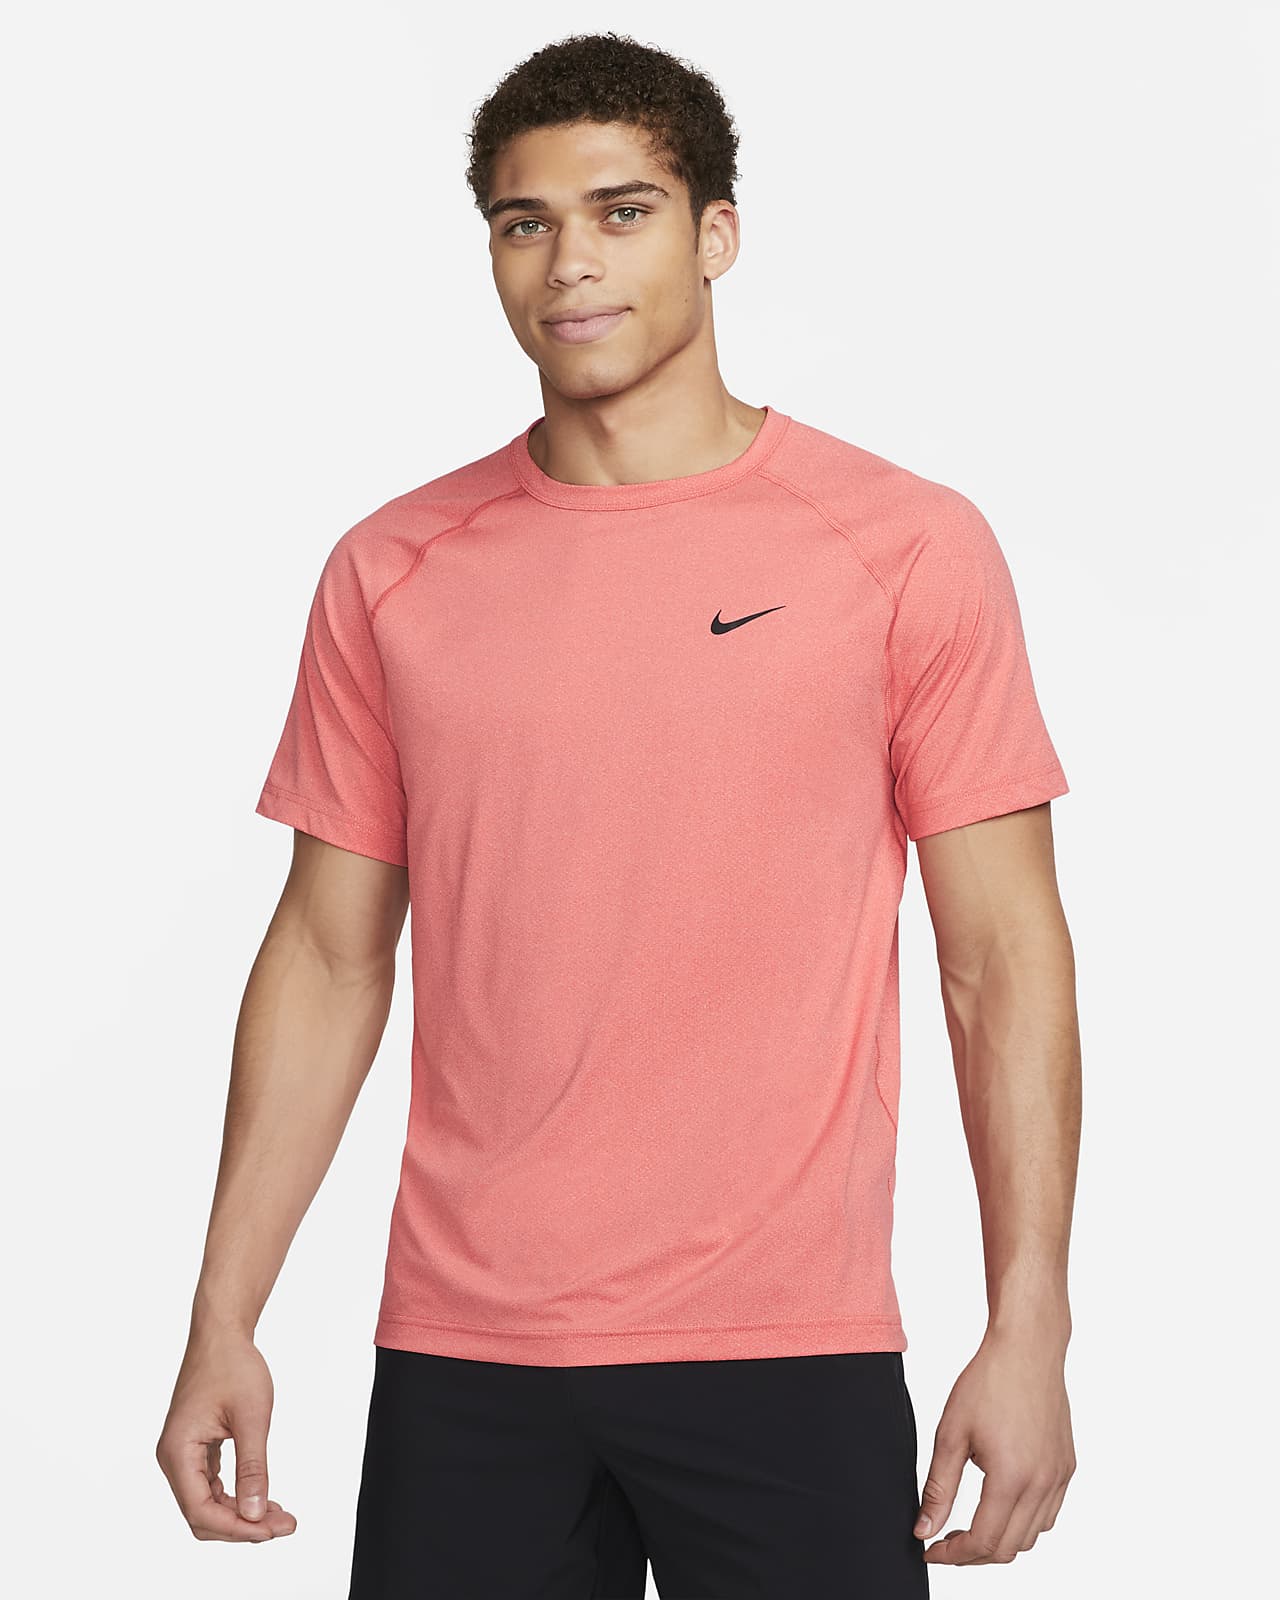 Just Launched: Nike Metcon 8, Nike Dri-FIT Men's Fitness T-Shirt